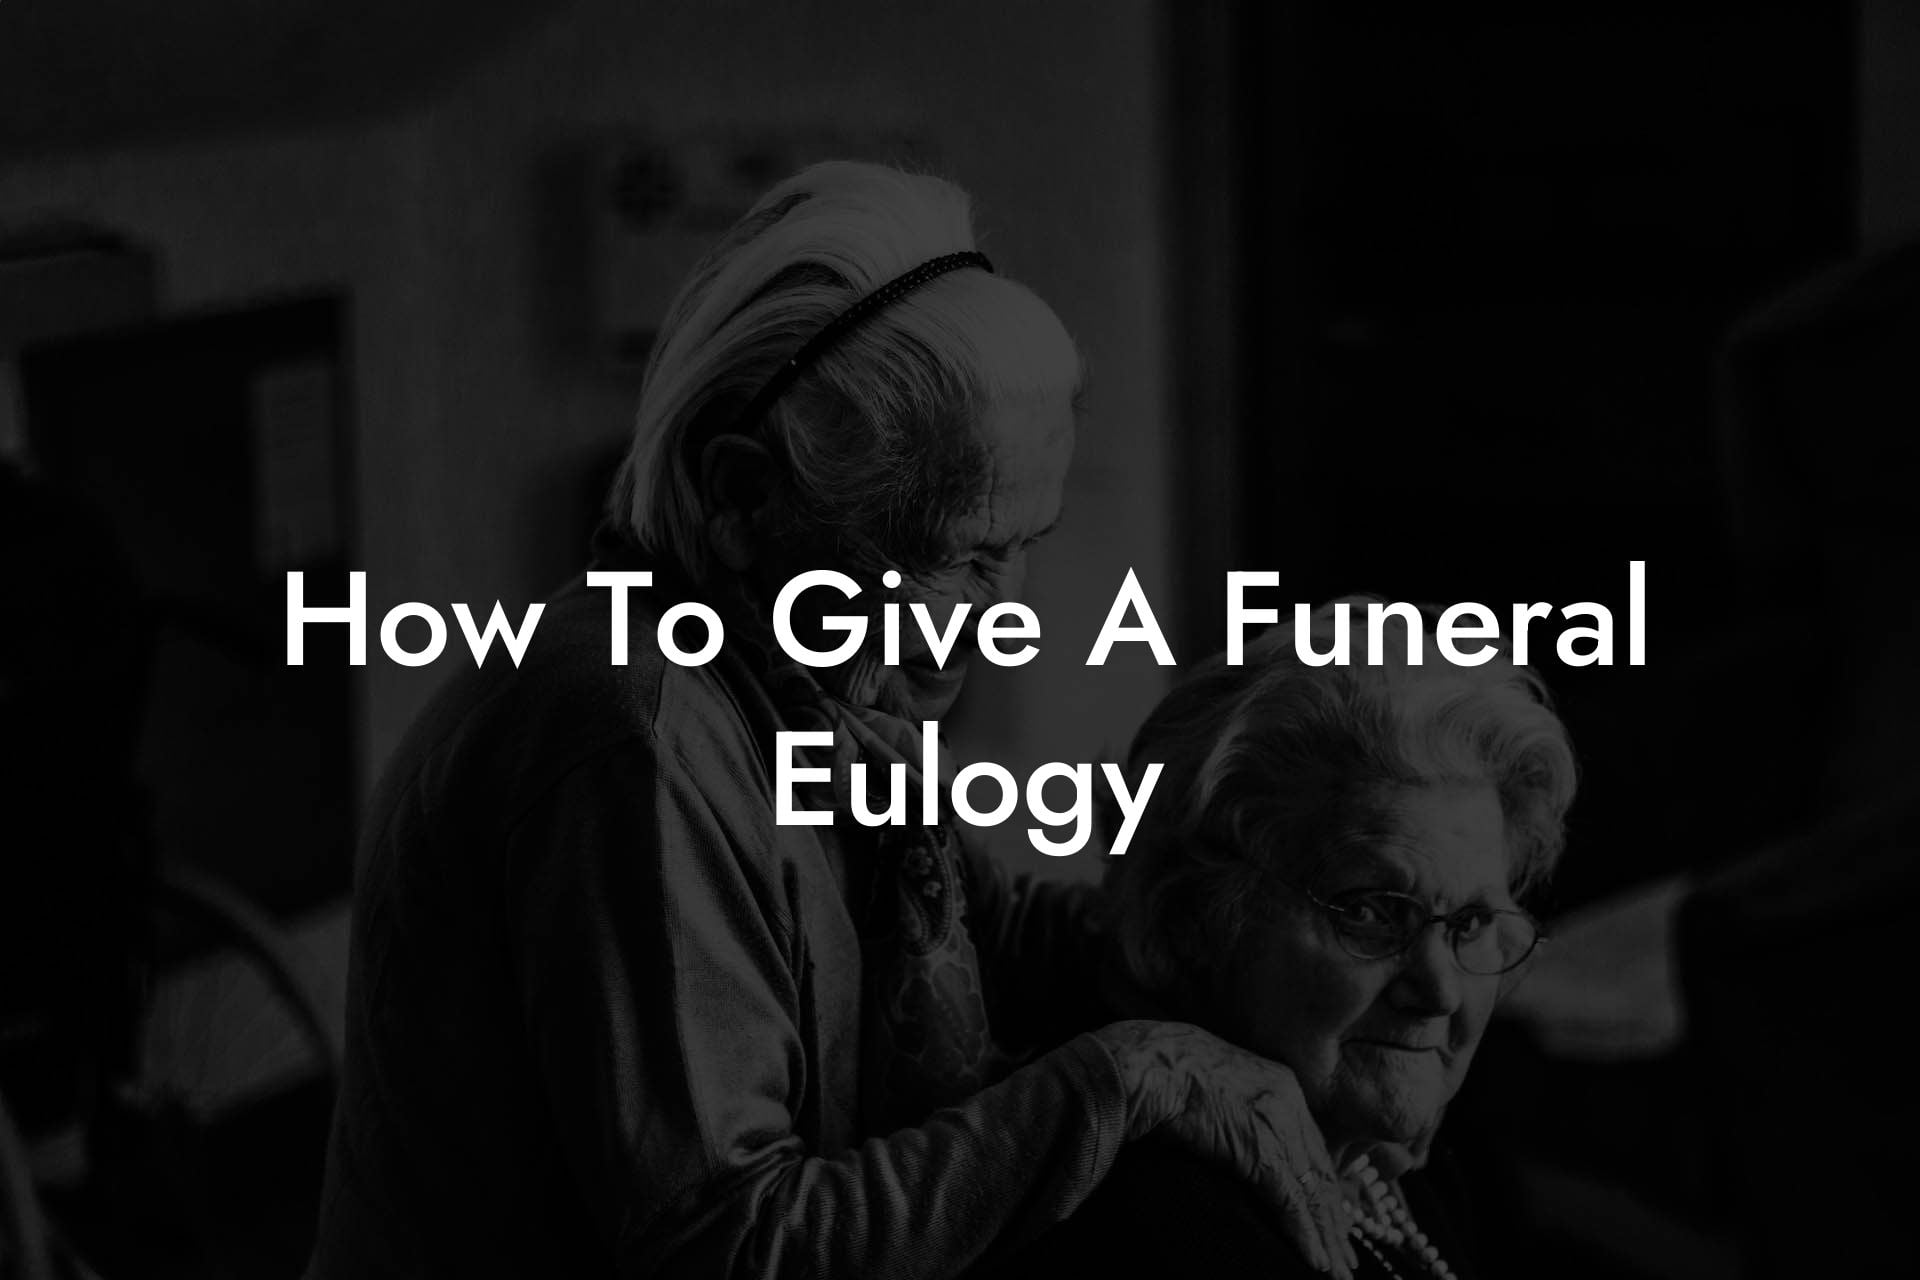 How To Give A Funeral Eulogy